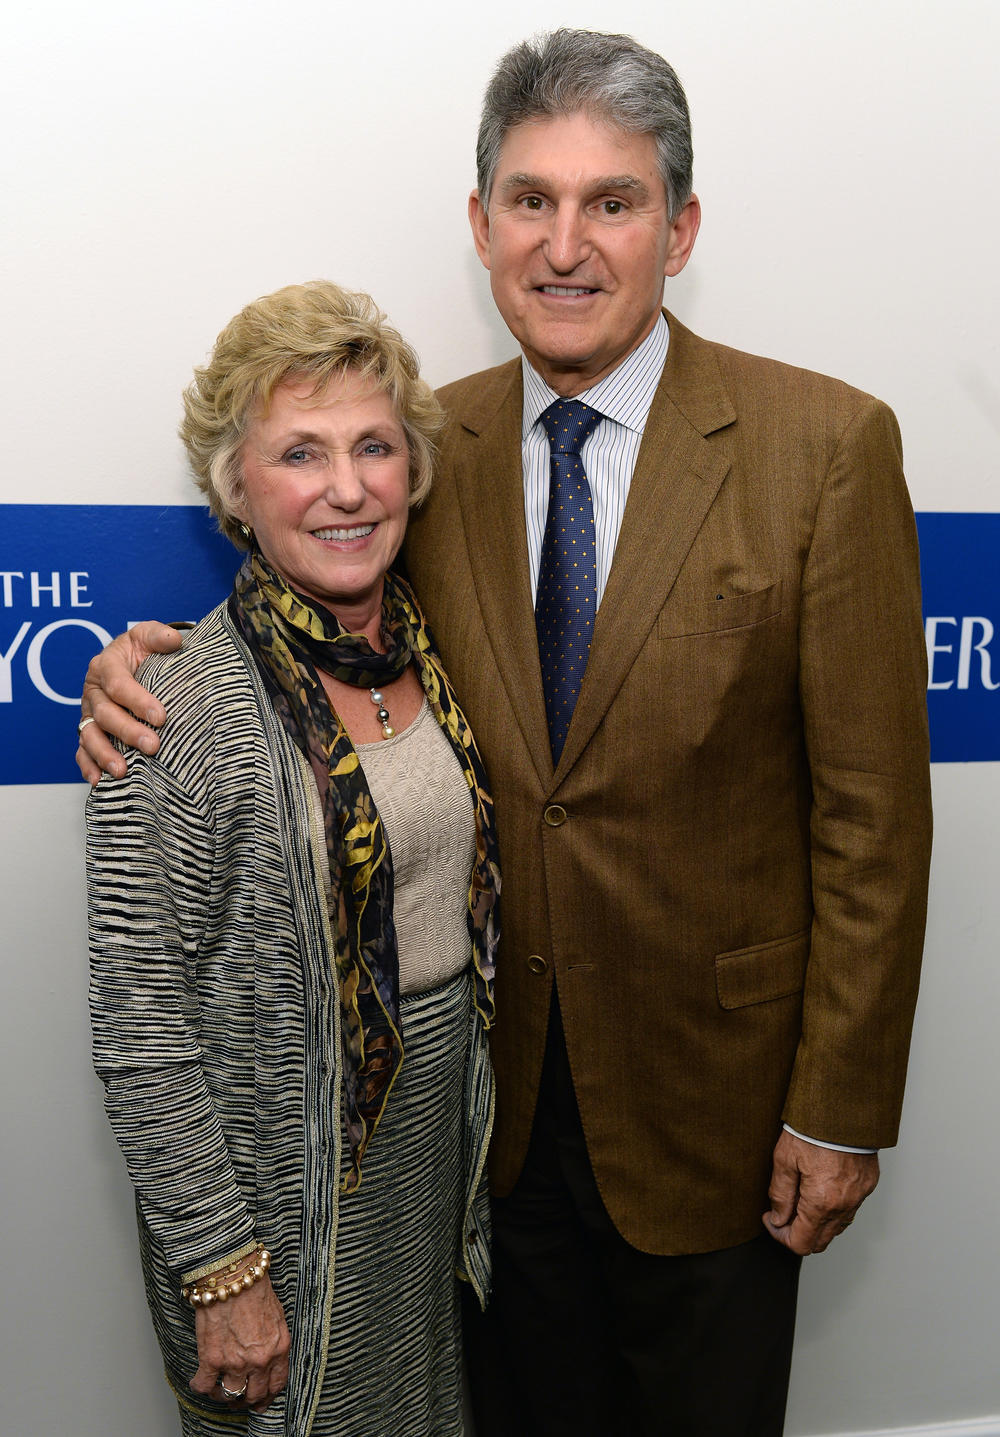 In 2018, Gov. Justice fired then-Education Secretary Gayle Manchin (left). Justice is now considering a run against Gayle Manchin's husband, Democratic U.S. Sen. Joe Manchin (right).